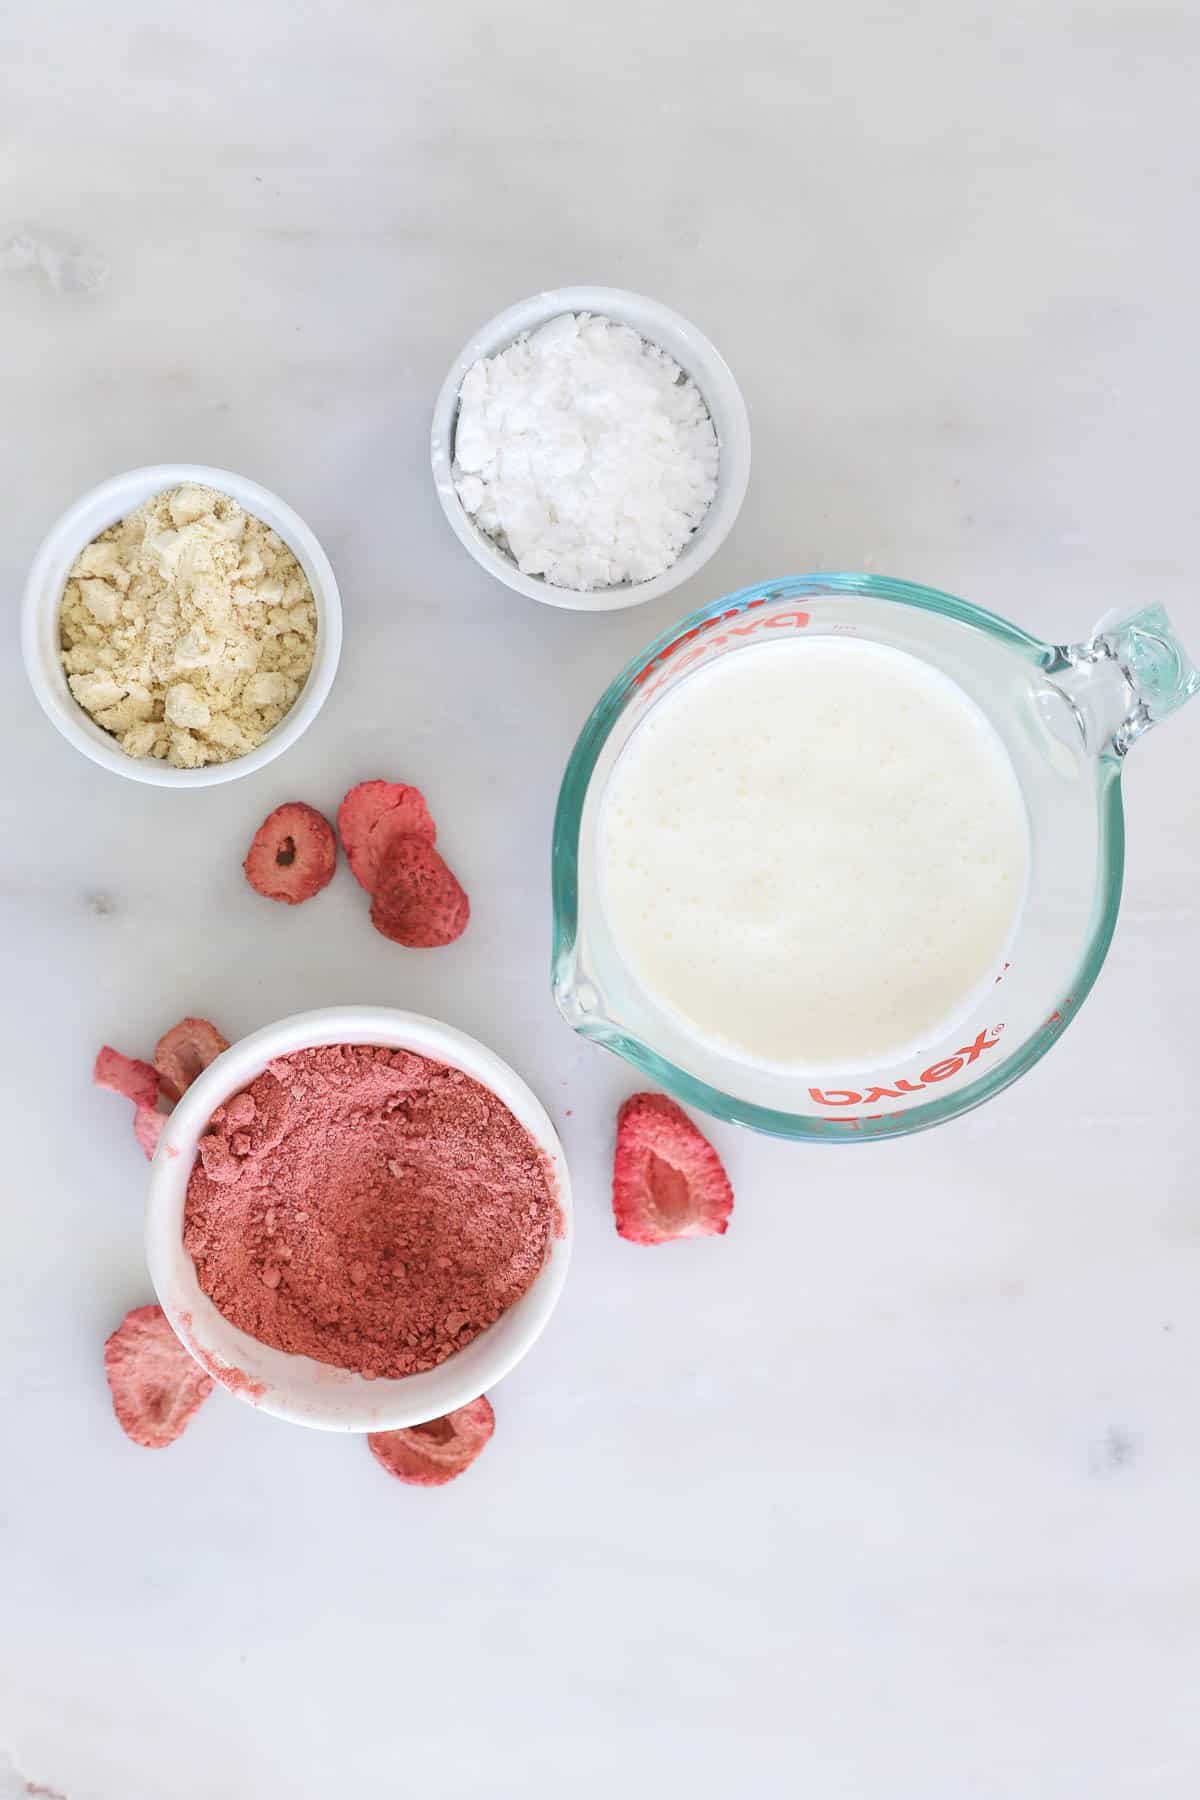 Ingredients for strawberry whipped cream in bowls: heavy cream, powdered strawberries, malt powder and powered sugar